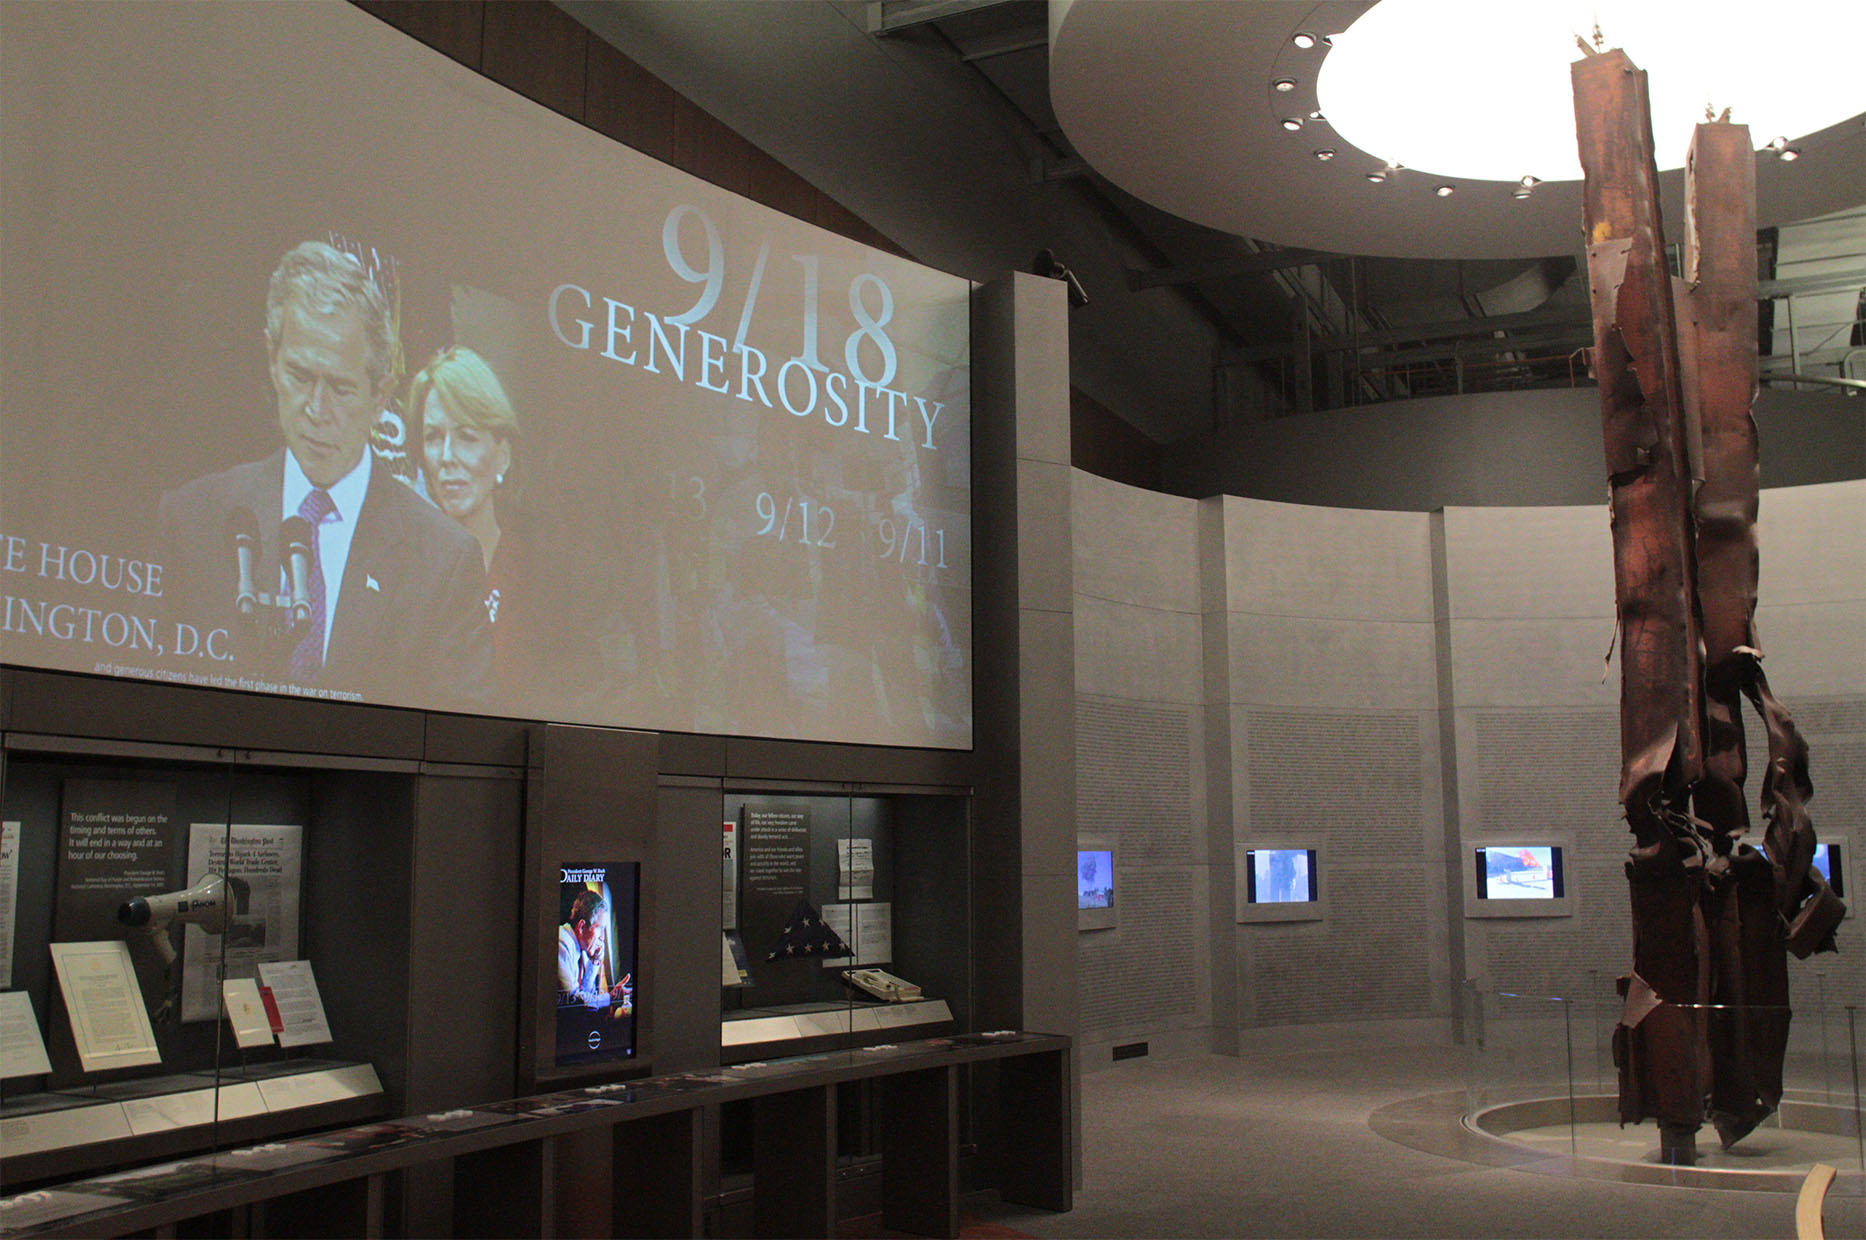 Second image of the display screens and steel beam in the September 11th exhibit.